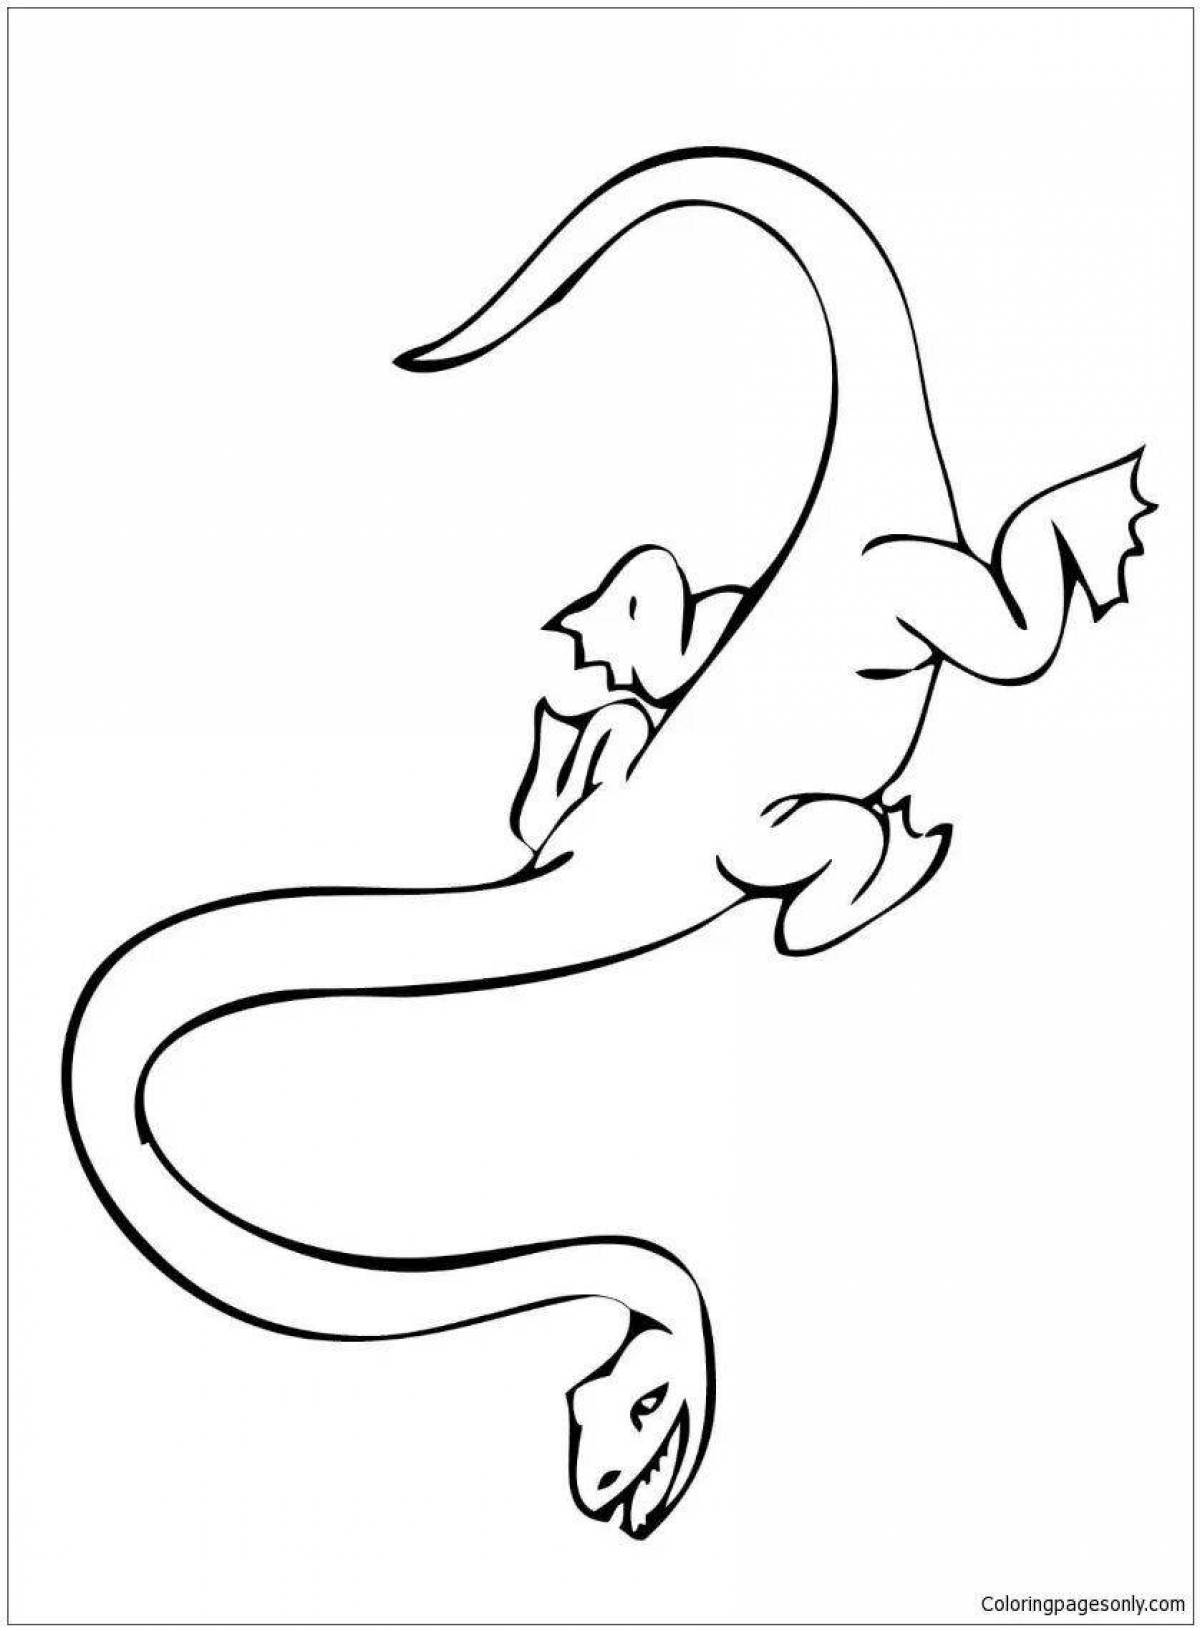 Adorable Loch Ness monster coloring page